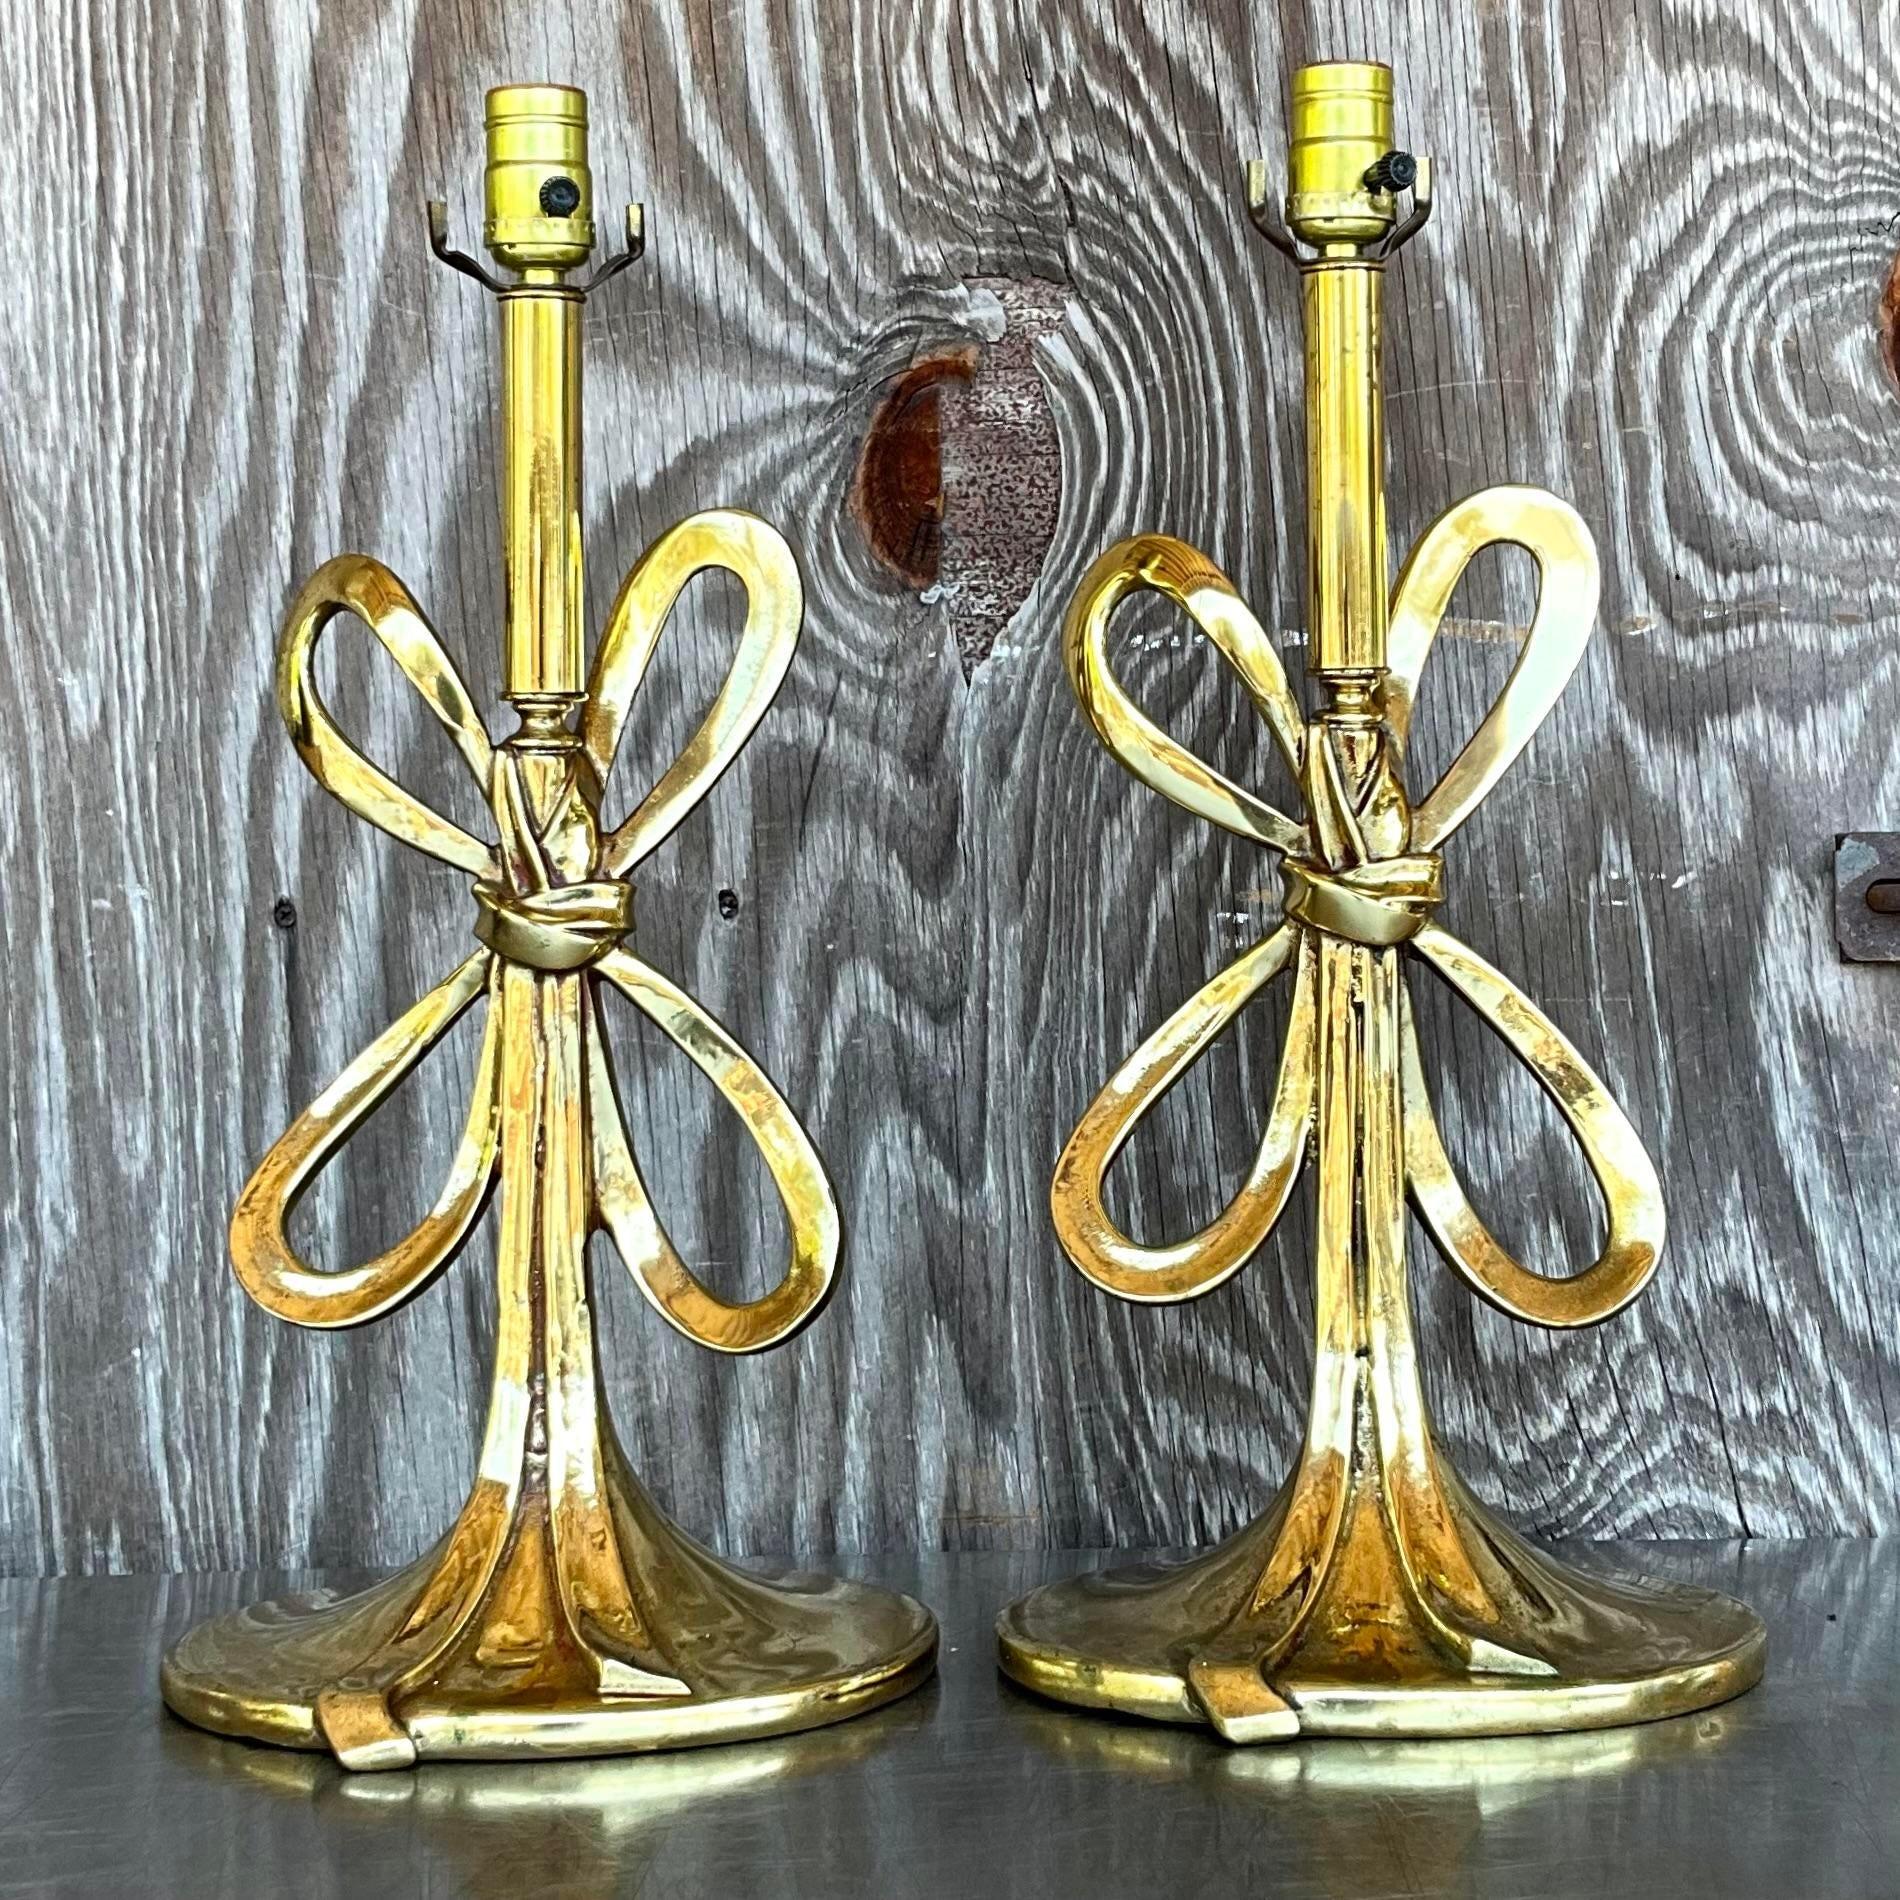 American Vintage Italian Regency Polished Brass Bow Lamps - a Pair